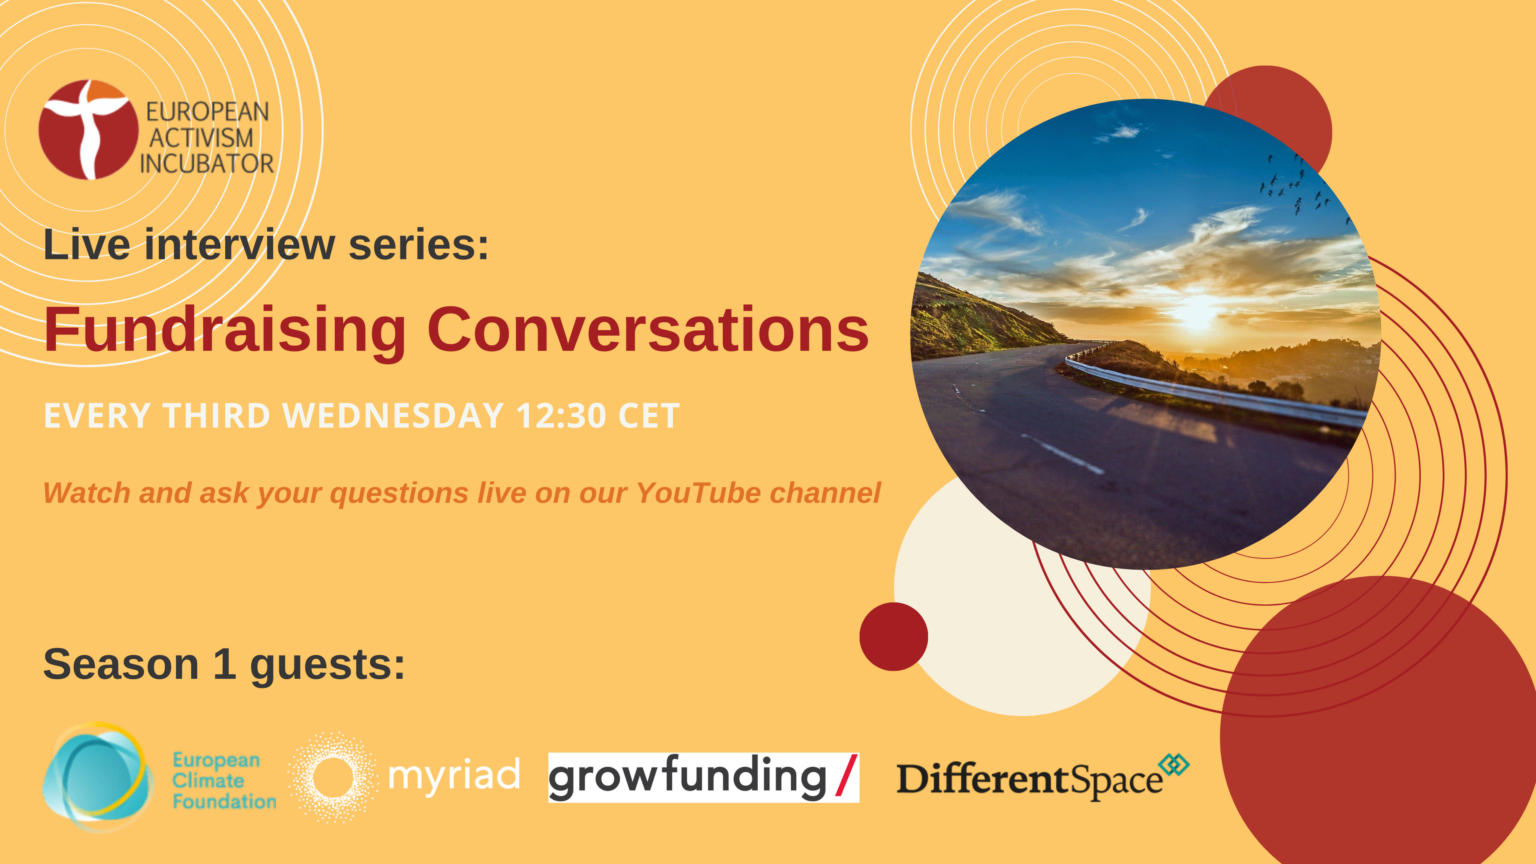 Live interview series: Fundraising Conversations